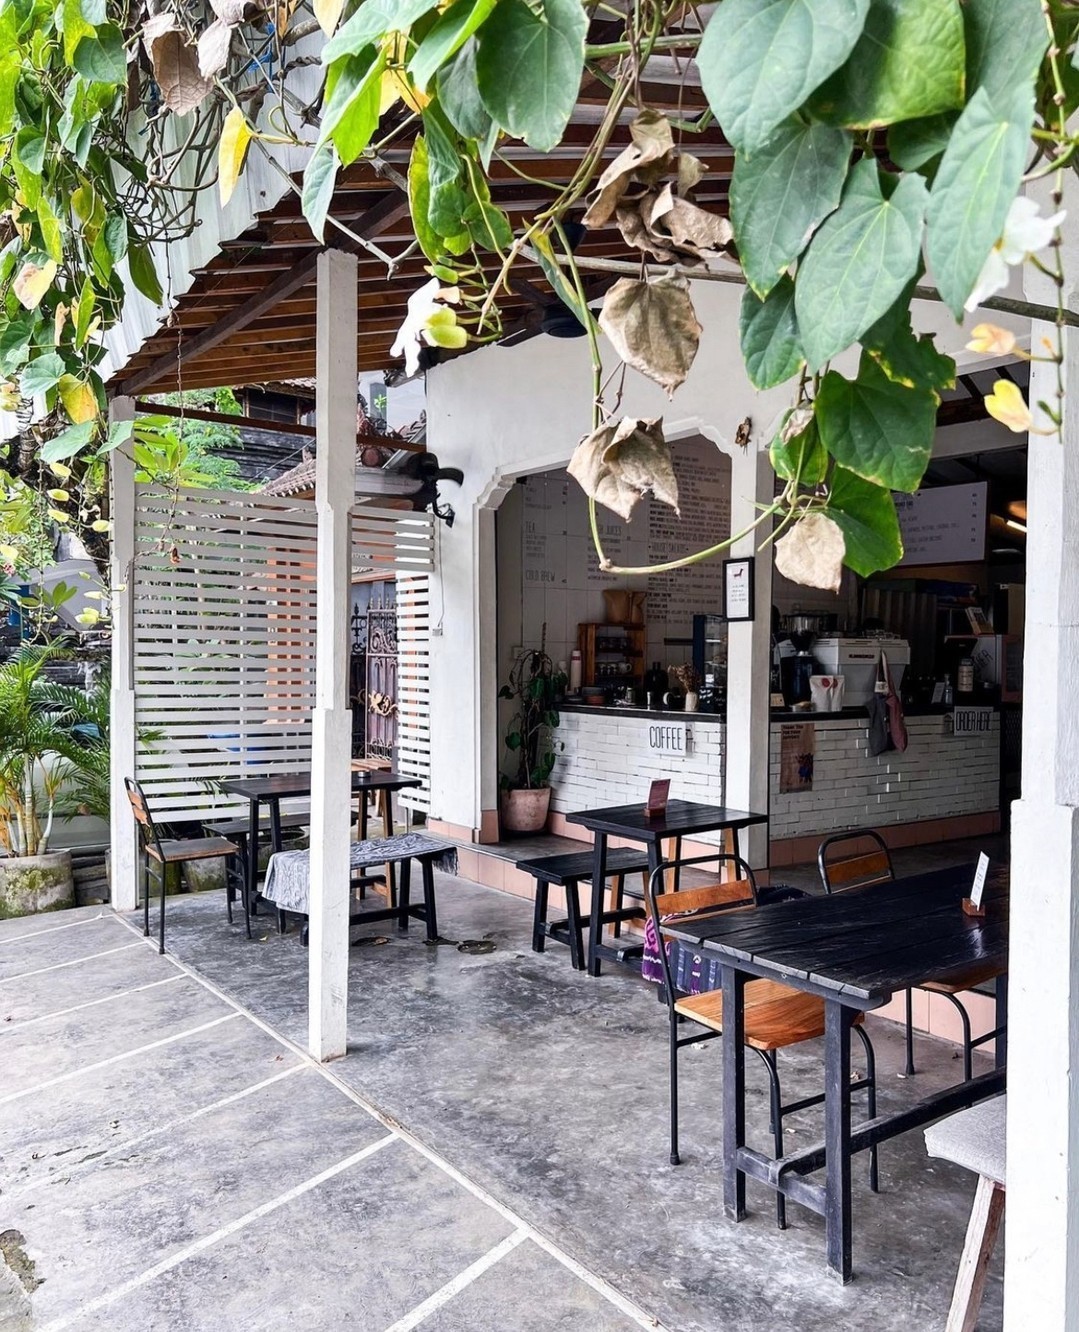 Cafe patio with overhead green vines, white wooden slats, black tables, and an open coffee bar area with a white-bricked backdrop.